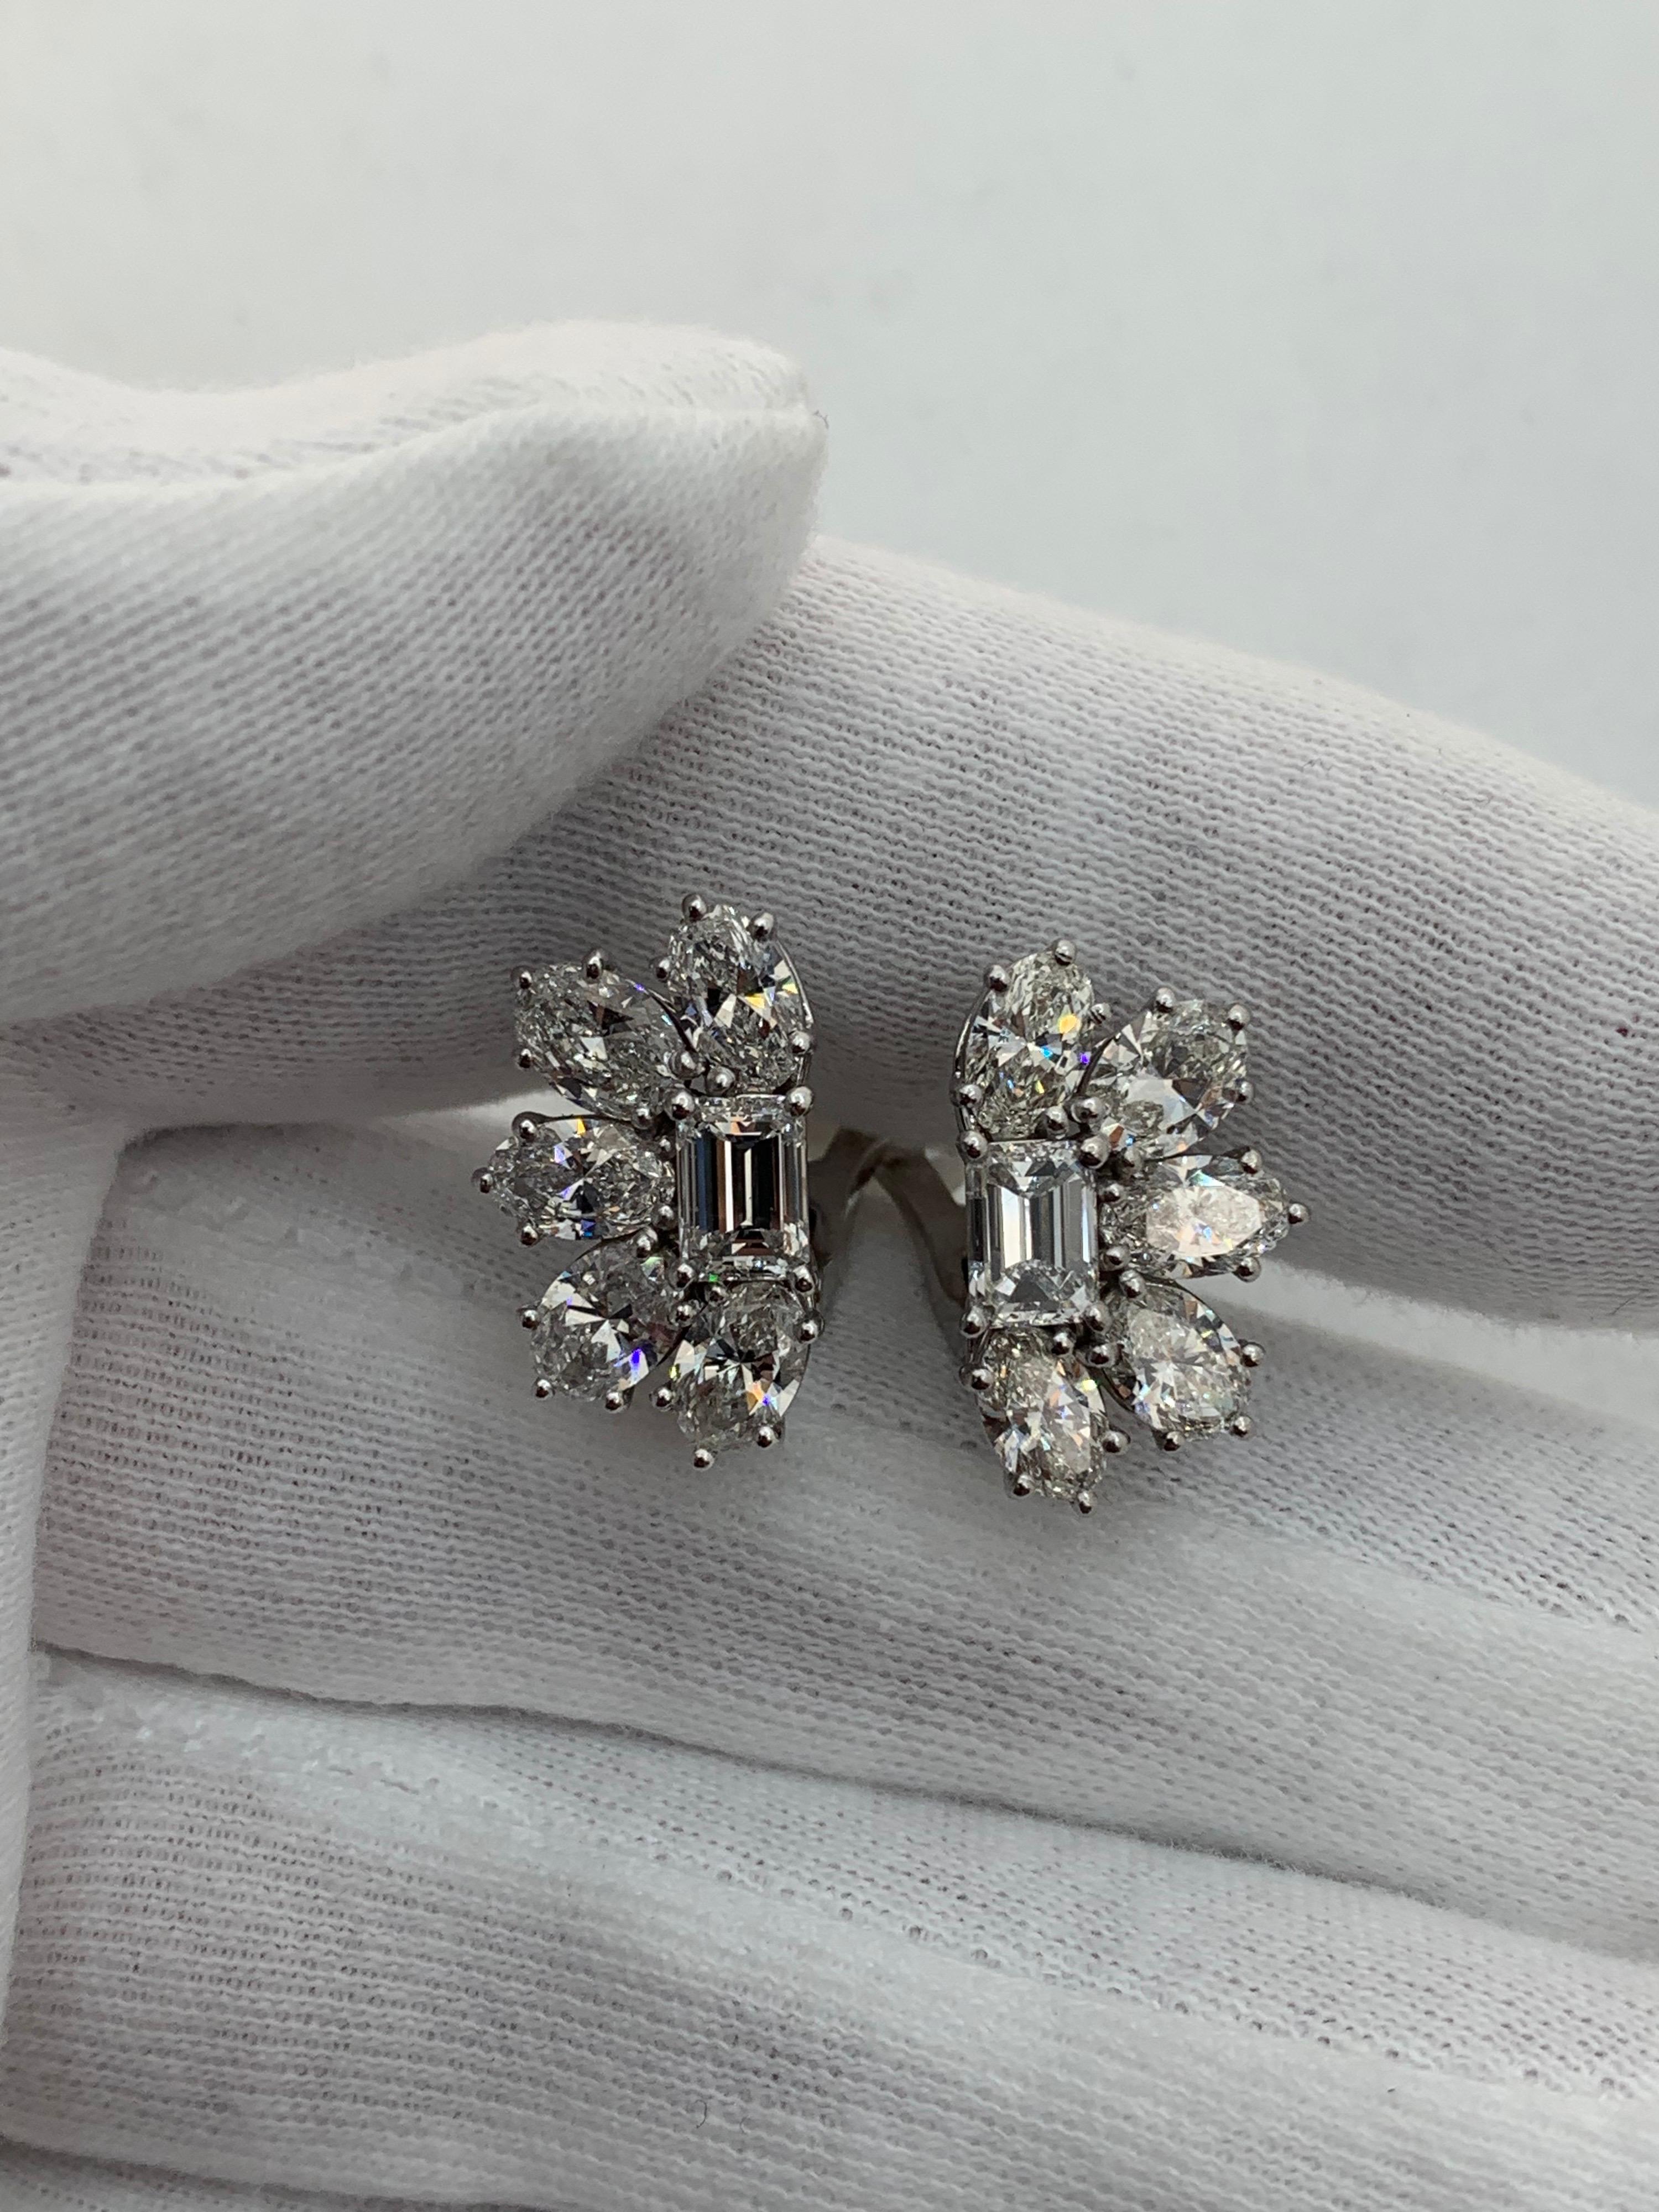 Sophisticated Statement Earring!!

Emerald Cut Diamonds weighing 1.55 Carat graded as D color and VS2, VVS1 clarity.
Oval Diamonds weighing 4.38 Carats and graded by GIA as D-G color and VVS1-SI2 Clarity.
Set in Platinum and 18 Karat White